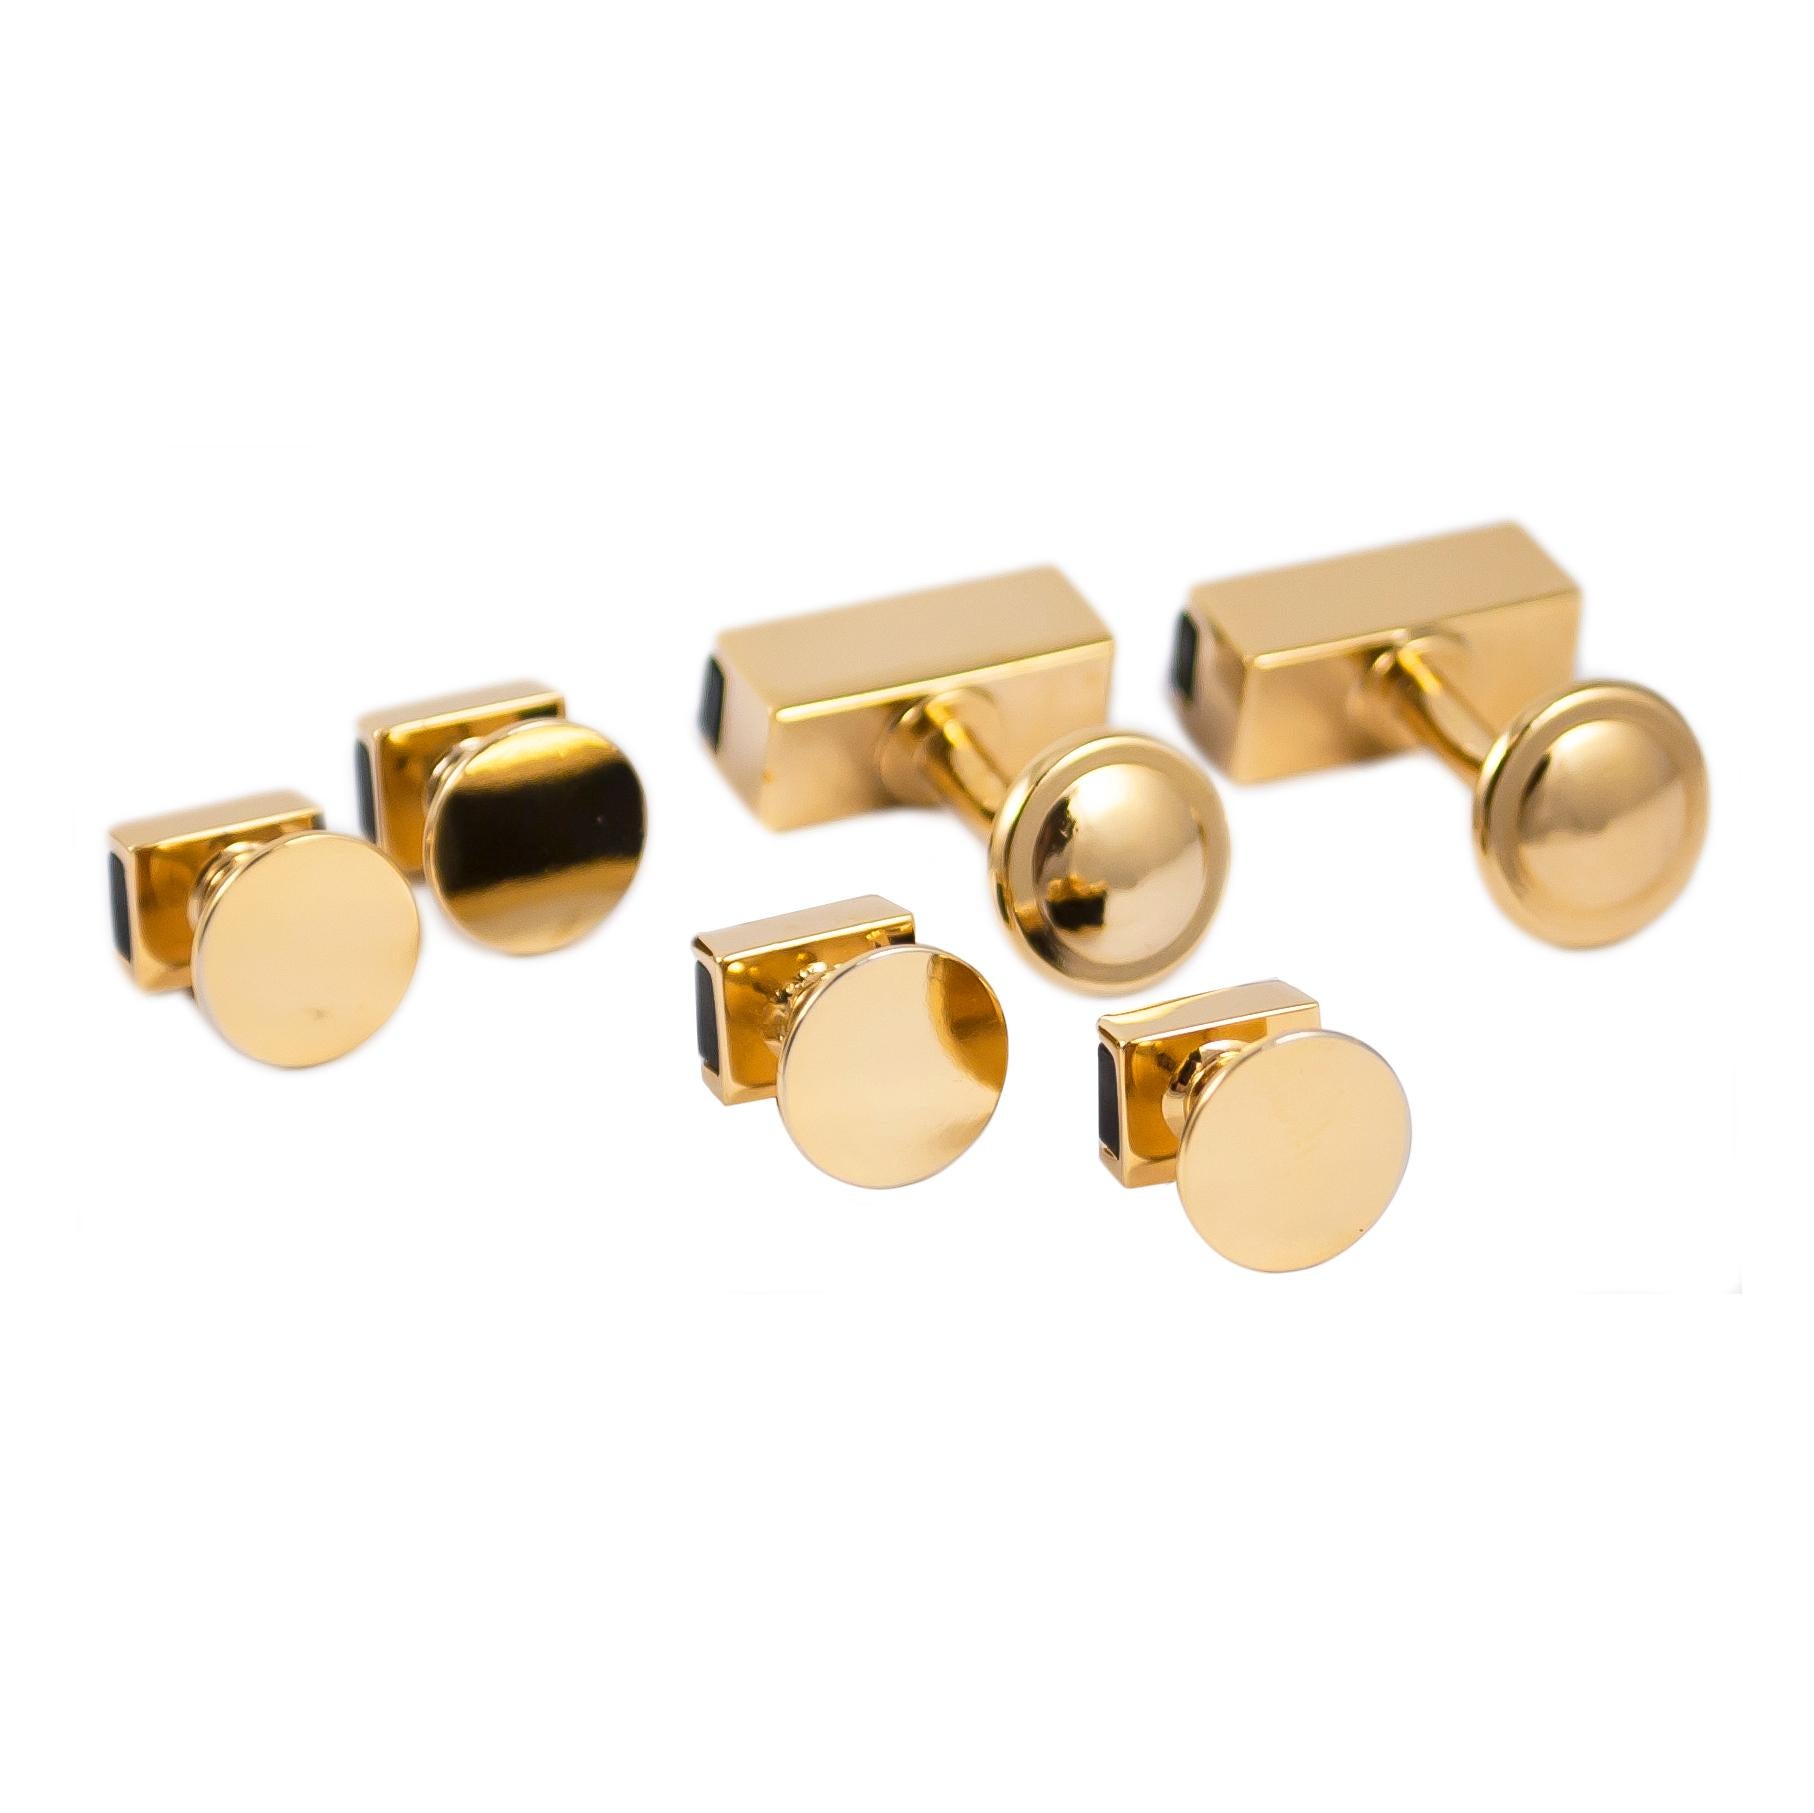 Women's or Men's J. Birnbach Yellow Gold and Onyx Cufflink and Stud Set